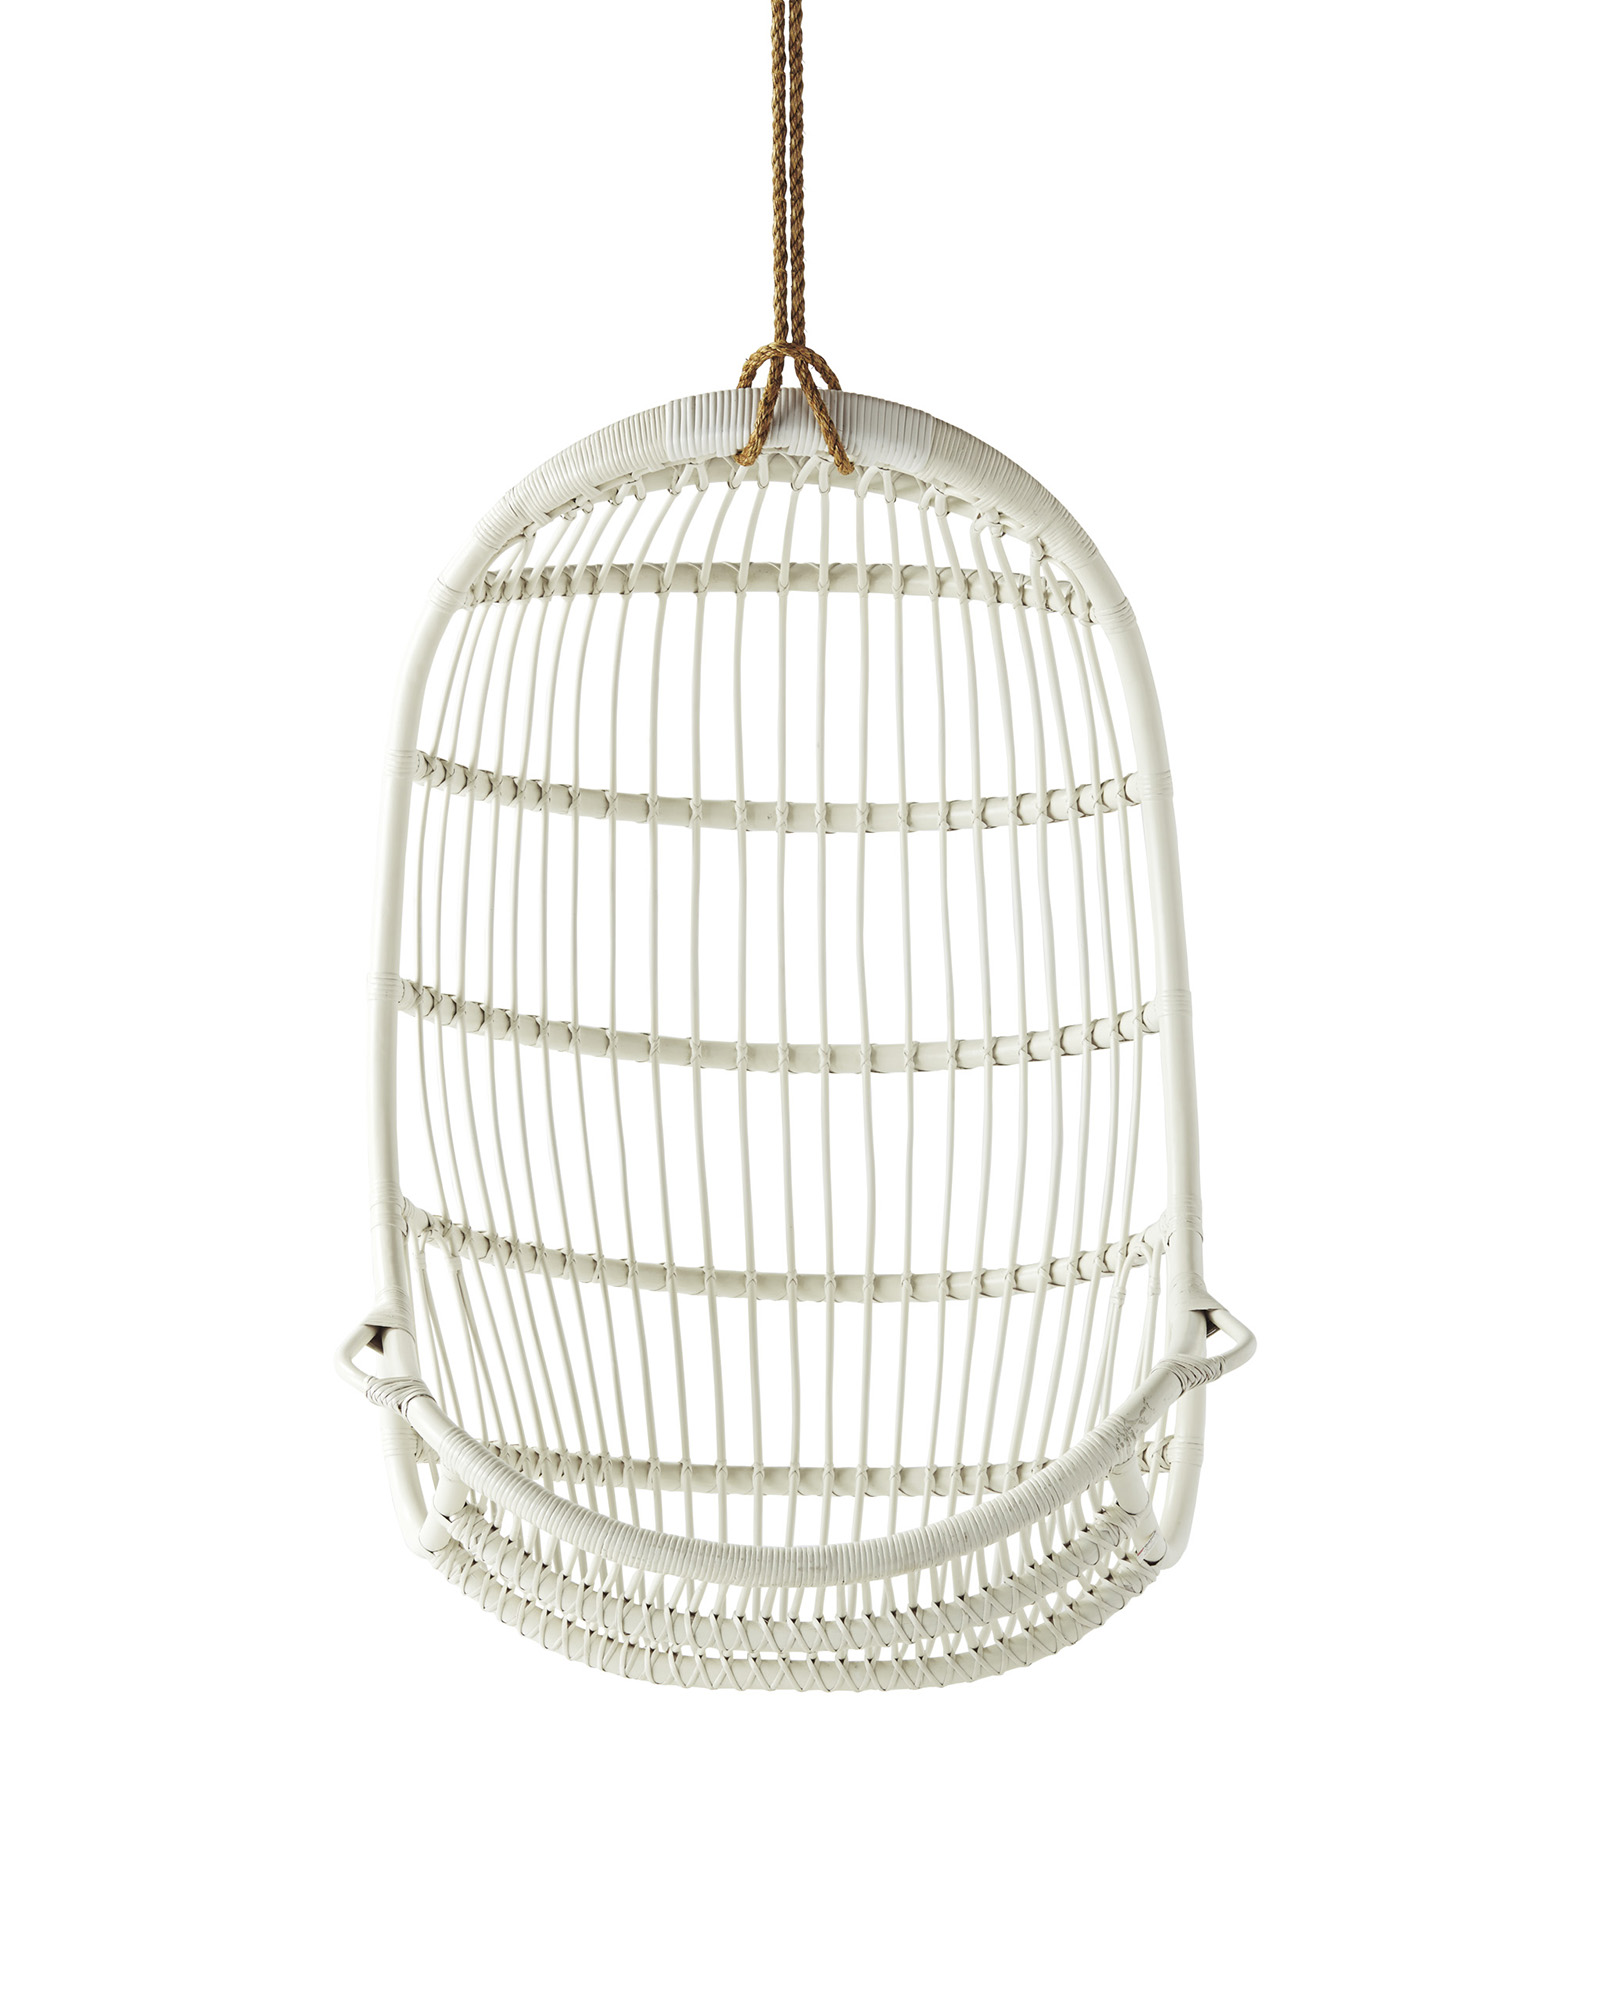 Rattan Hanging Chair by Expormim photo - 8